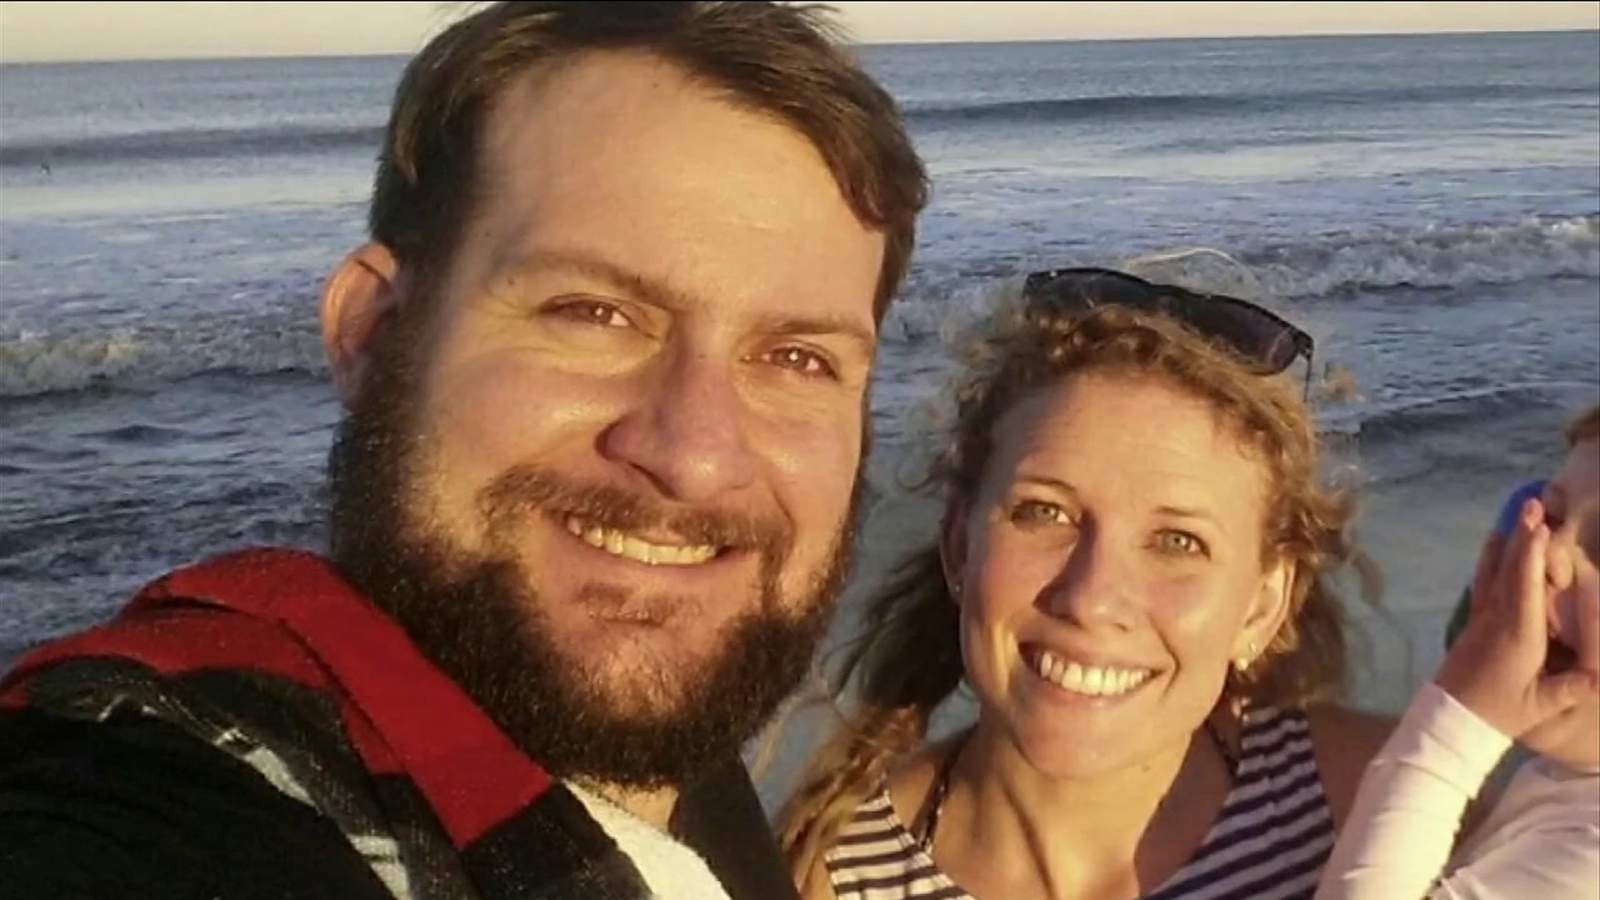 St. Marys couple killed in wrong-way crash were high school sweethearts